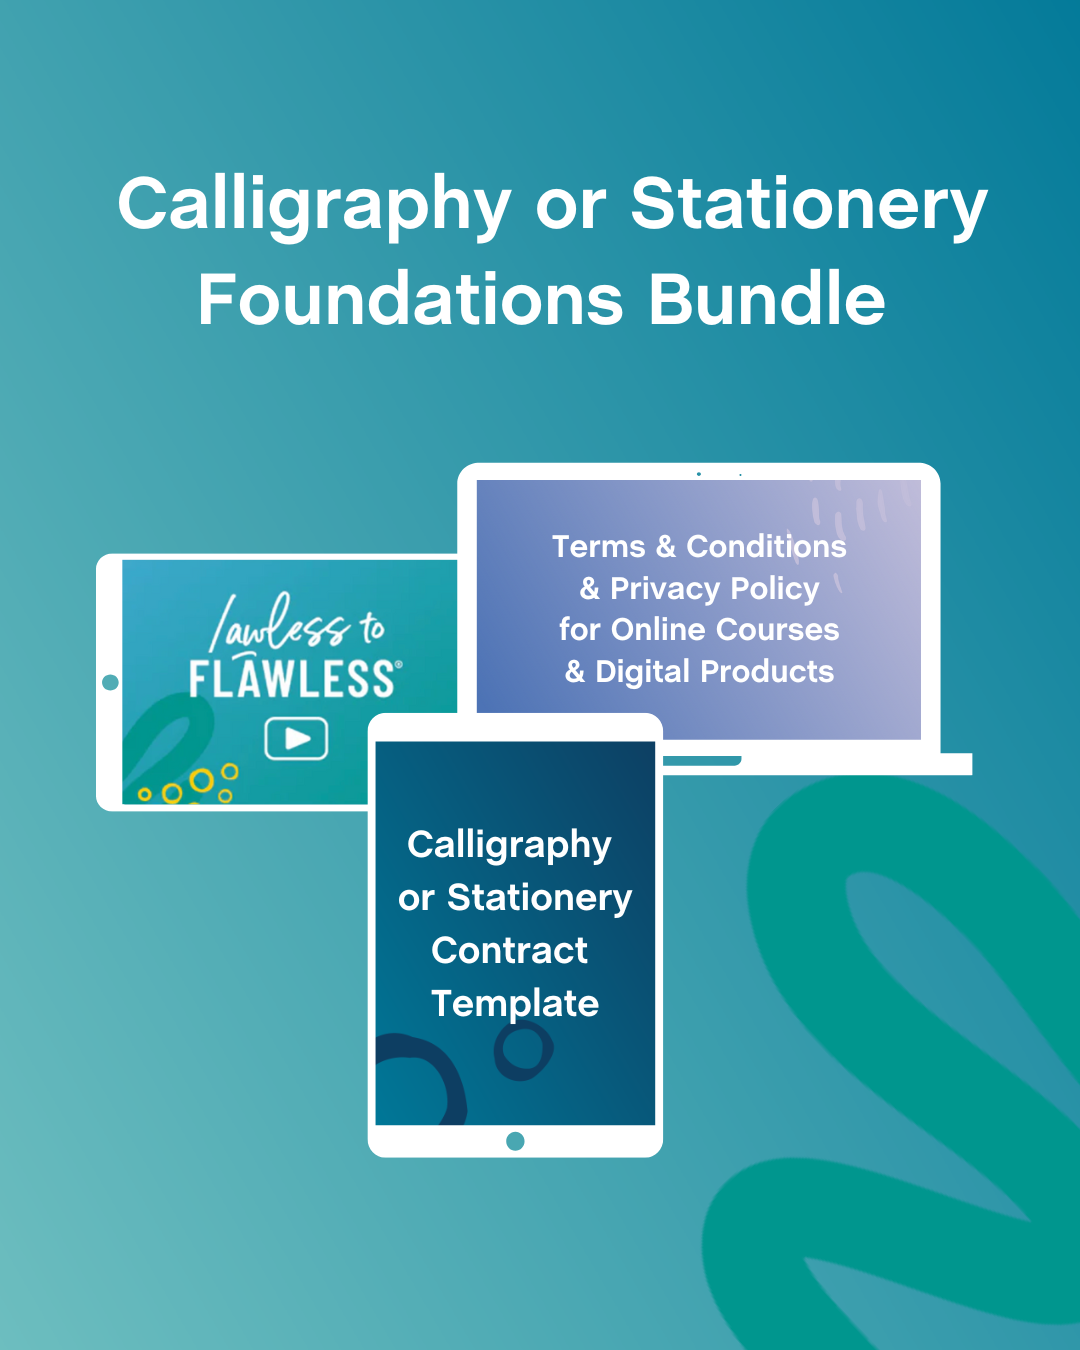 Calligraphy or Stationery Foundations Bundle